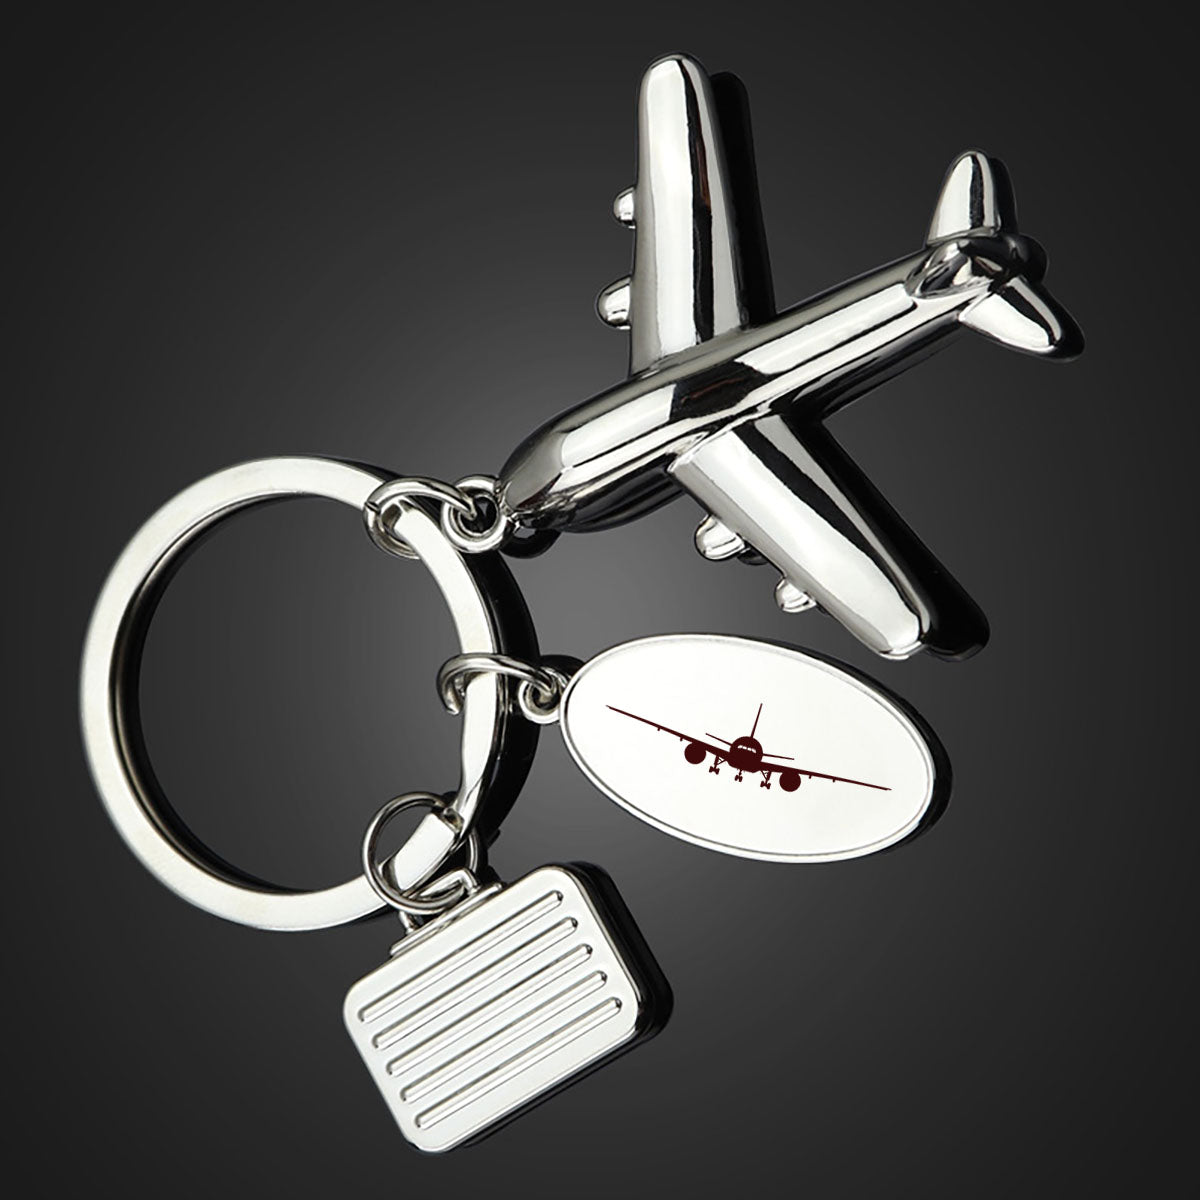 Boeing 777 Silhouette Designed Suitcase Airplane Key Chains